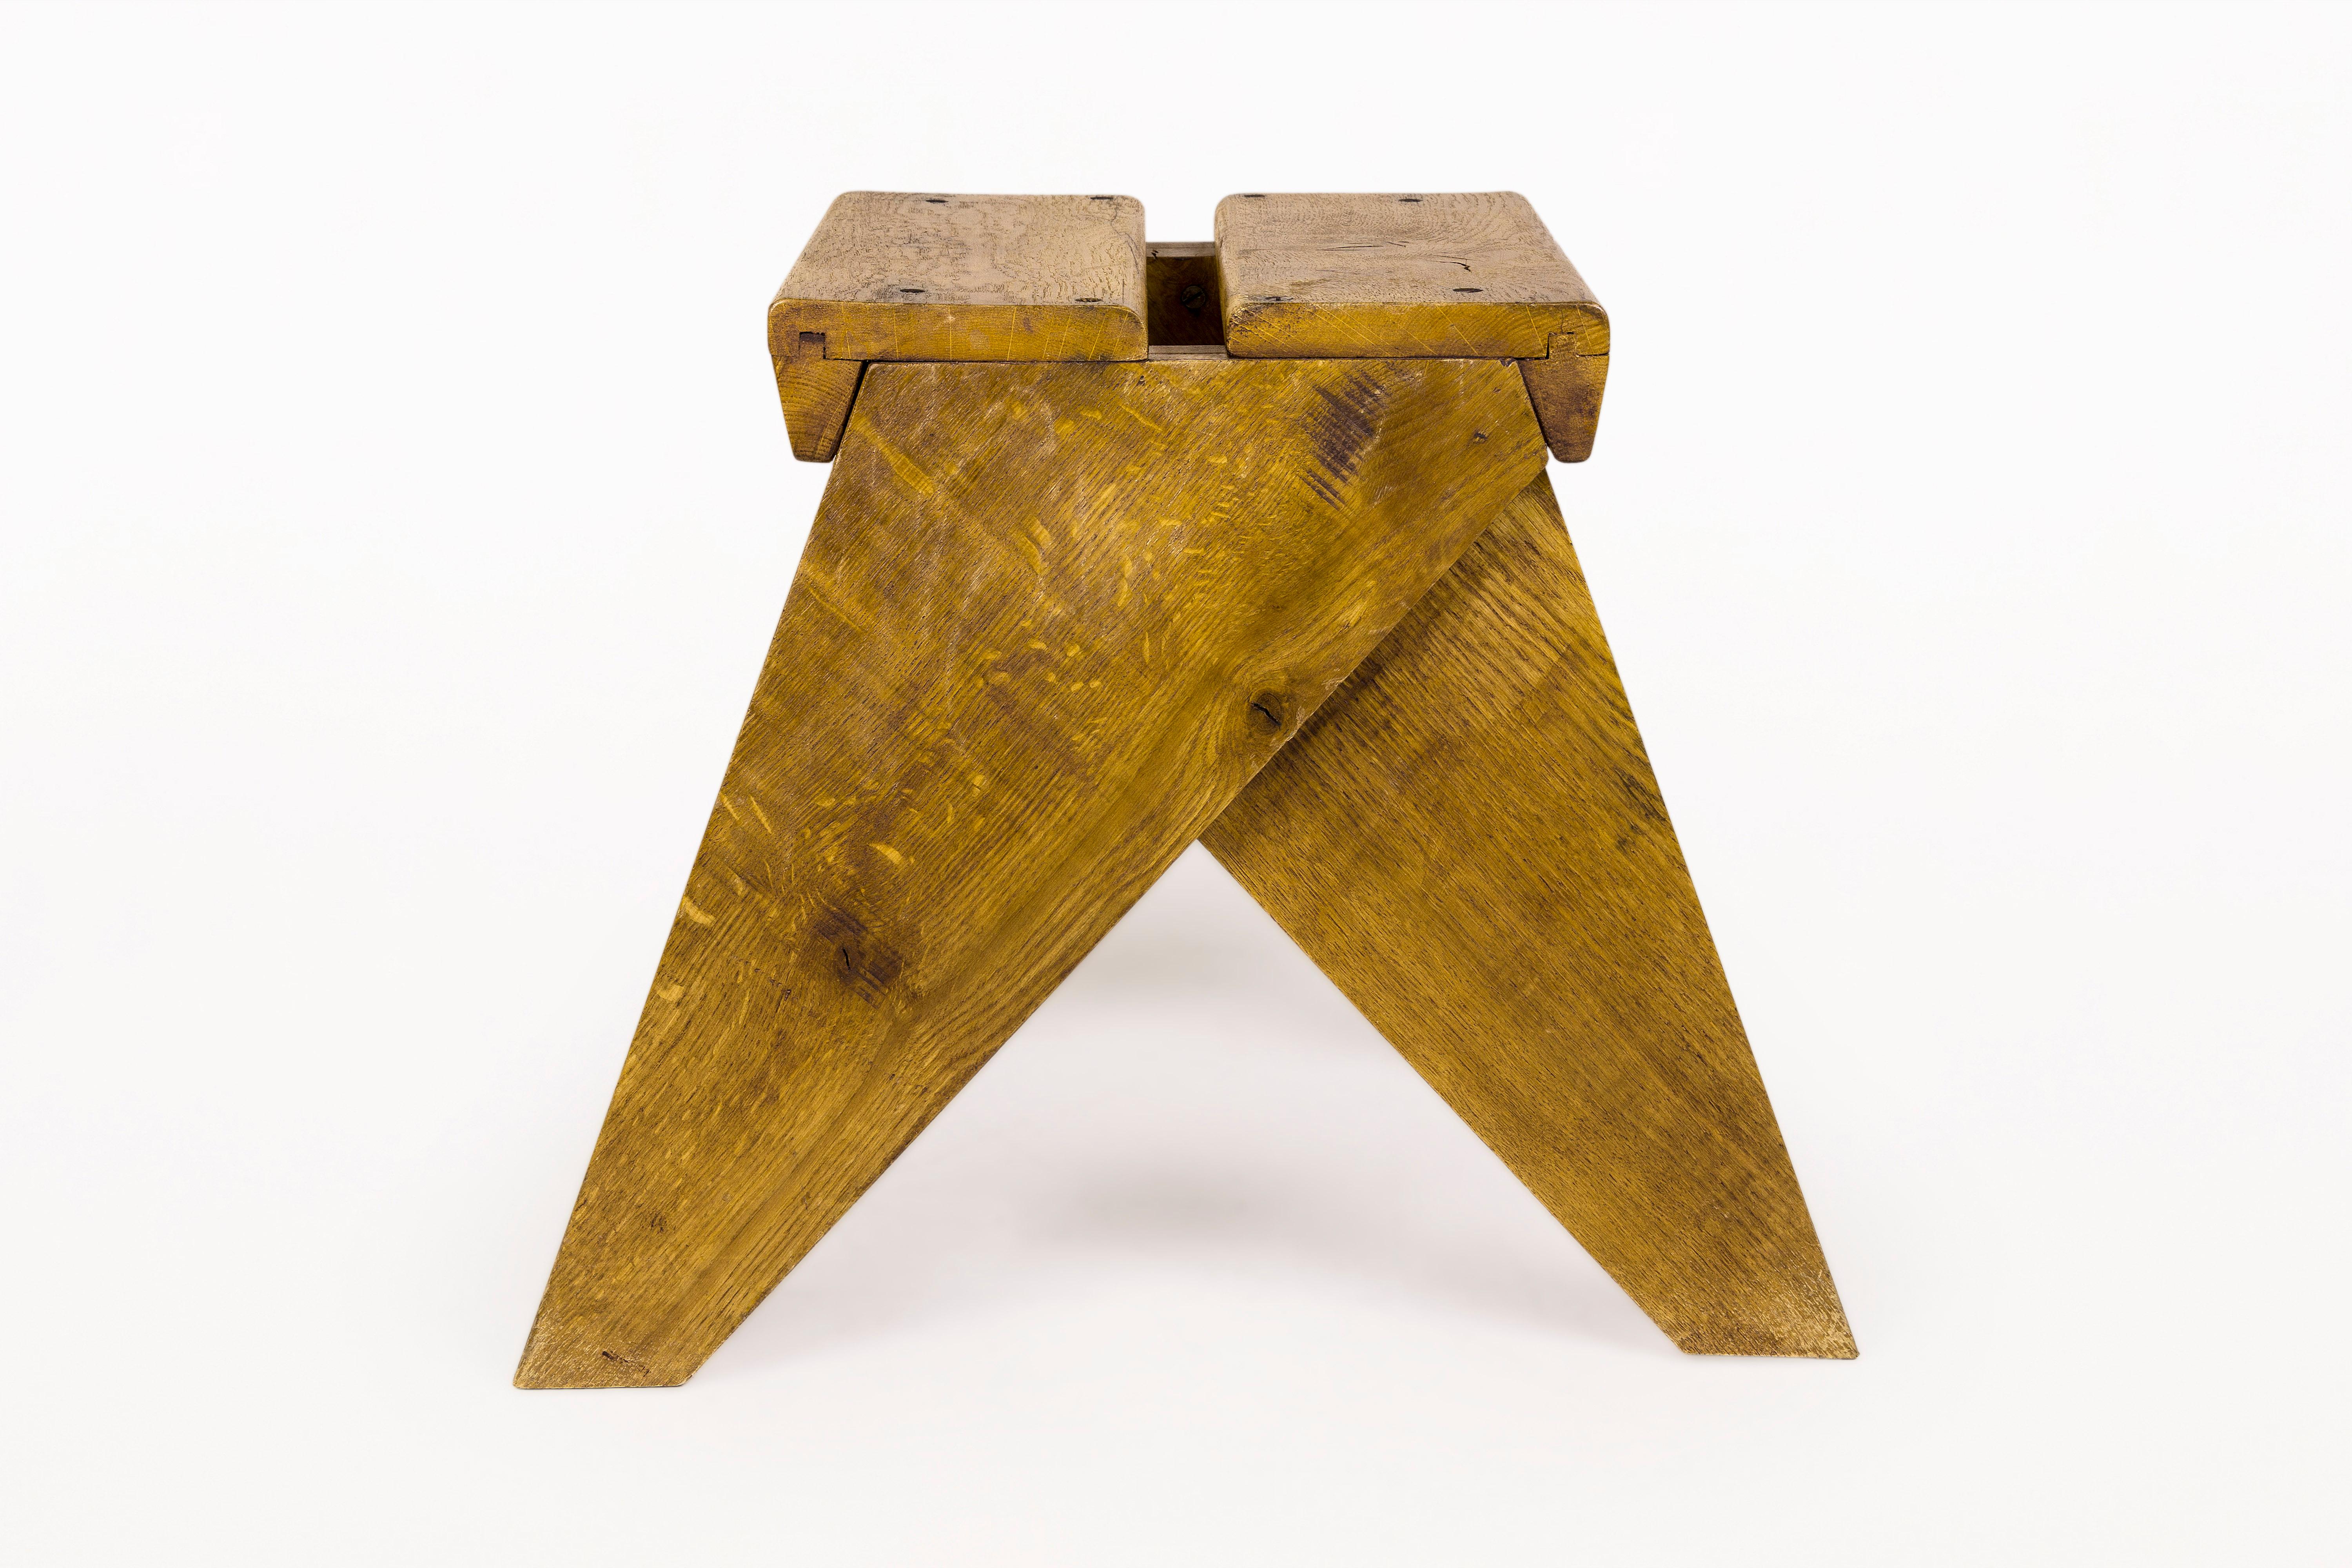 Marcel lods wooden stool
PIne wood stool,
circa 1950, France
Good vintage condition.
He studied at the National Superior School of Decorative Arts and the National Superior School of Fine Arts in Paris, where he graduated in 1923. Shortly after